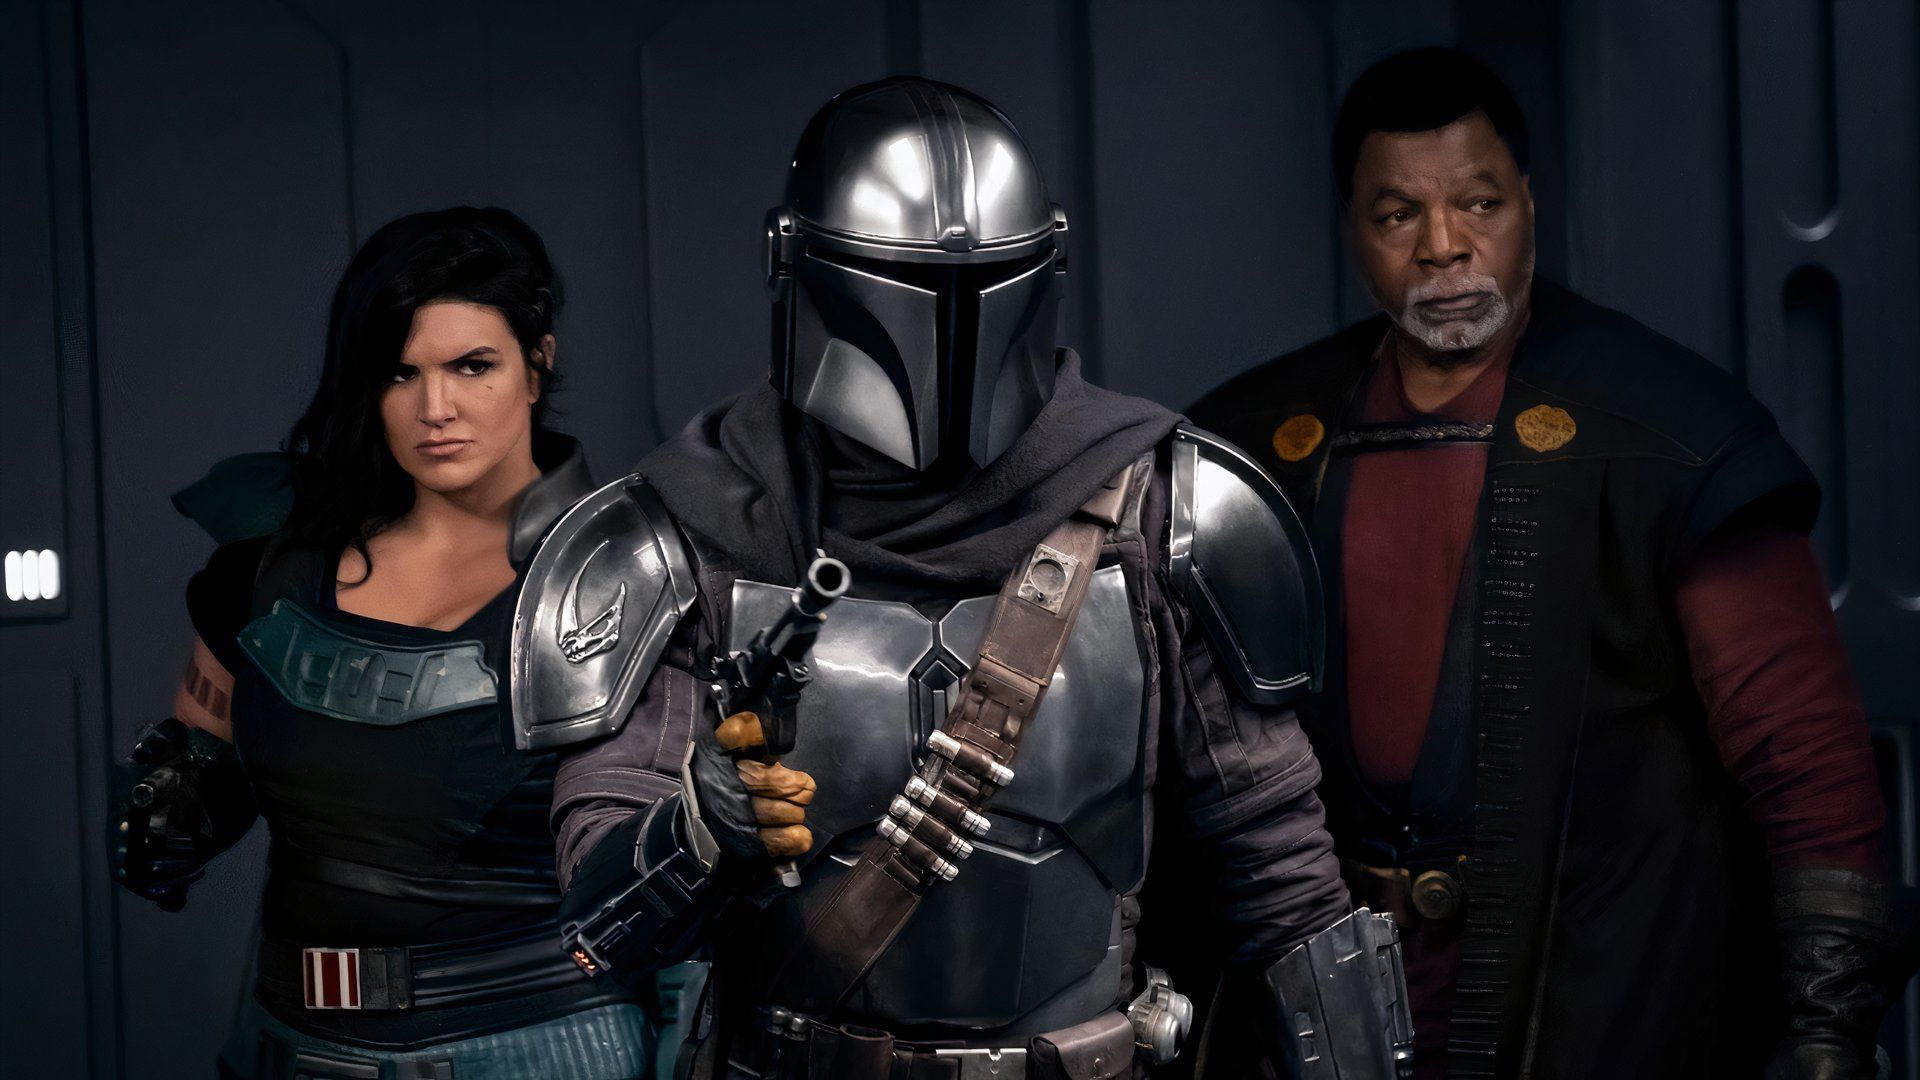 Gina Carano in The Mandalorian with Din Djarin in front of her holding a blaster